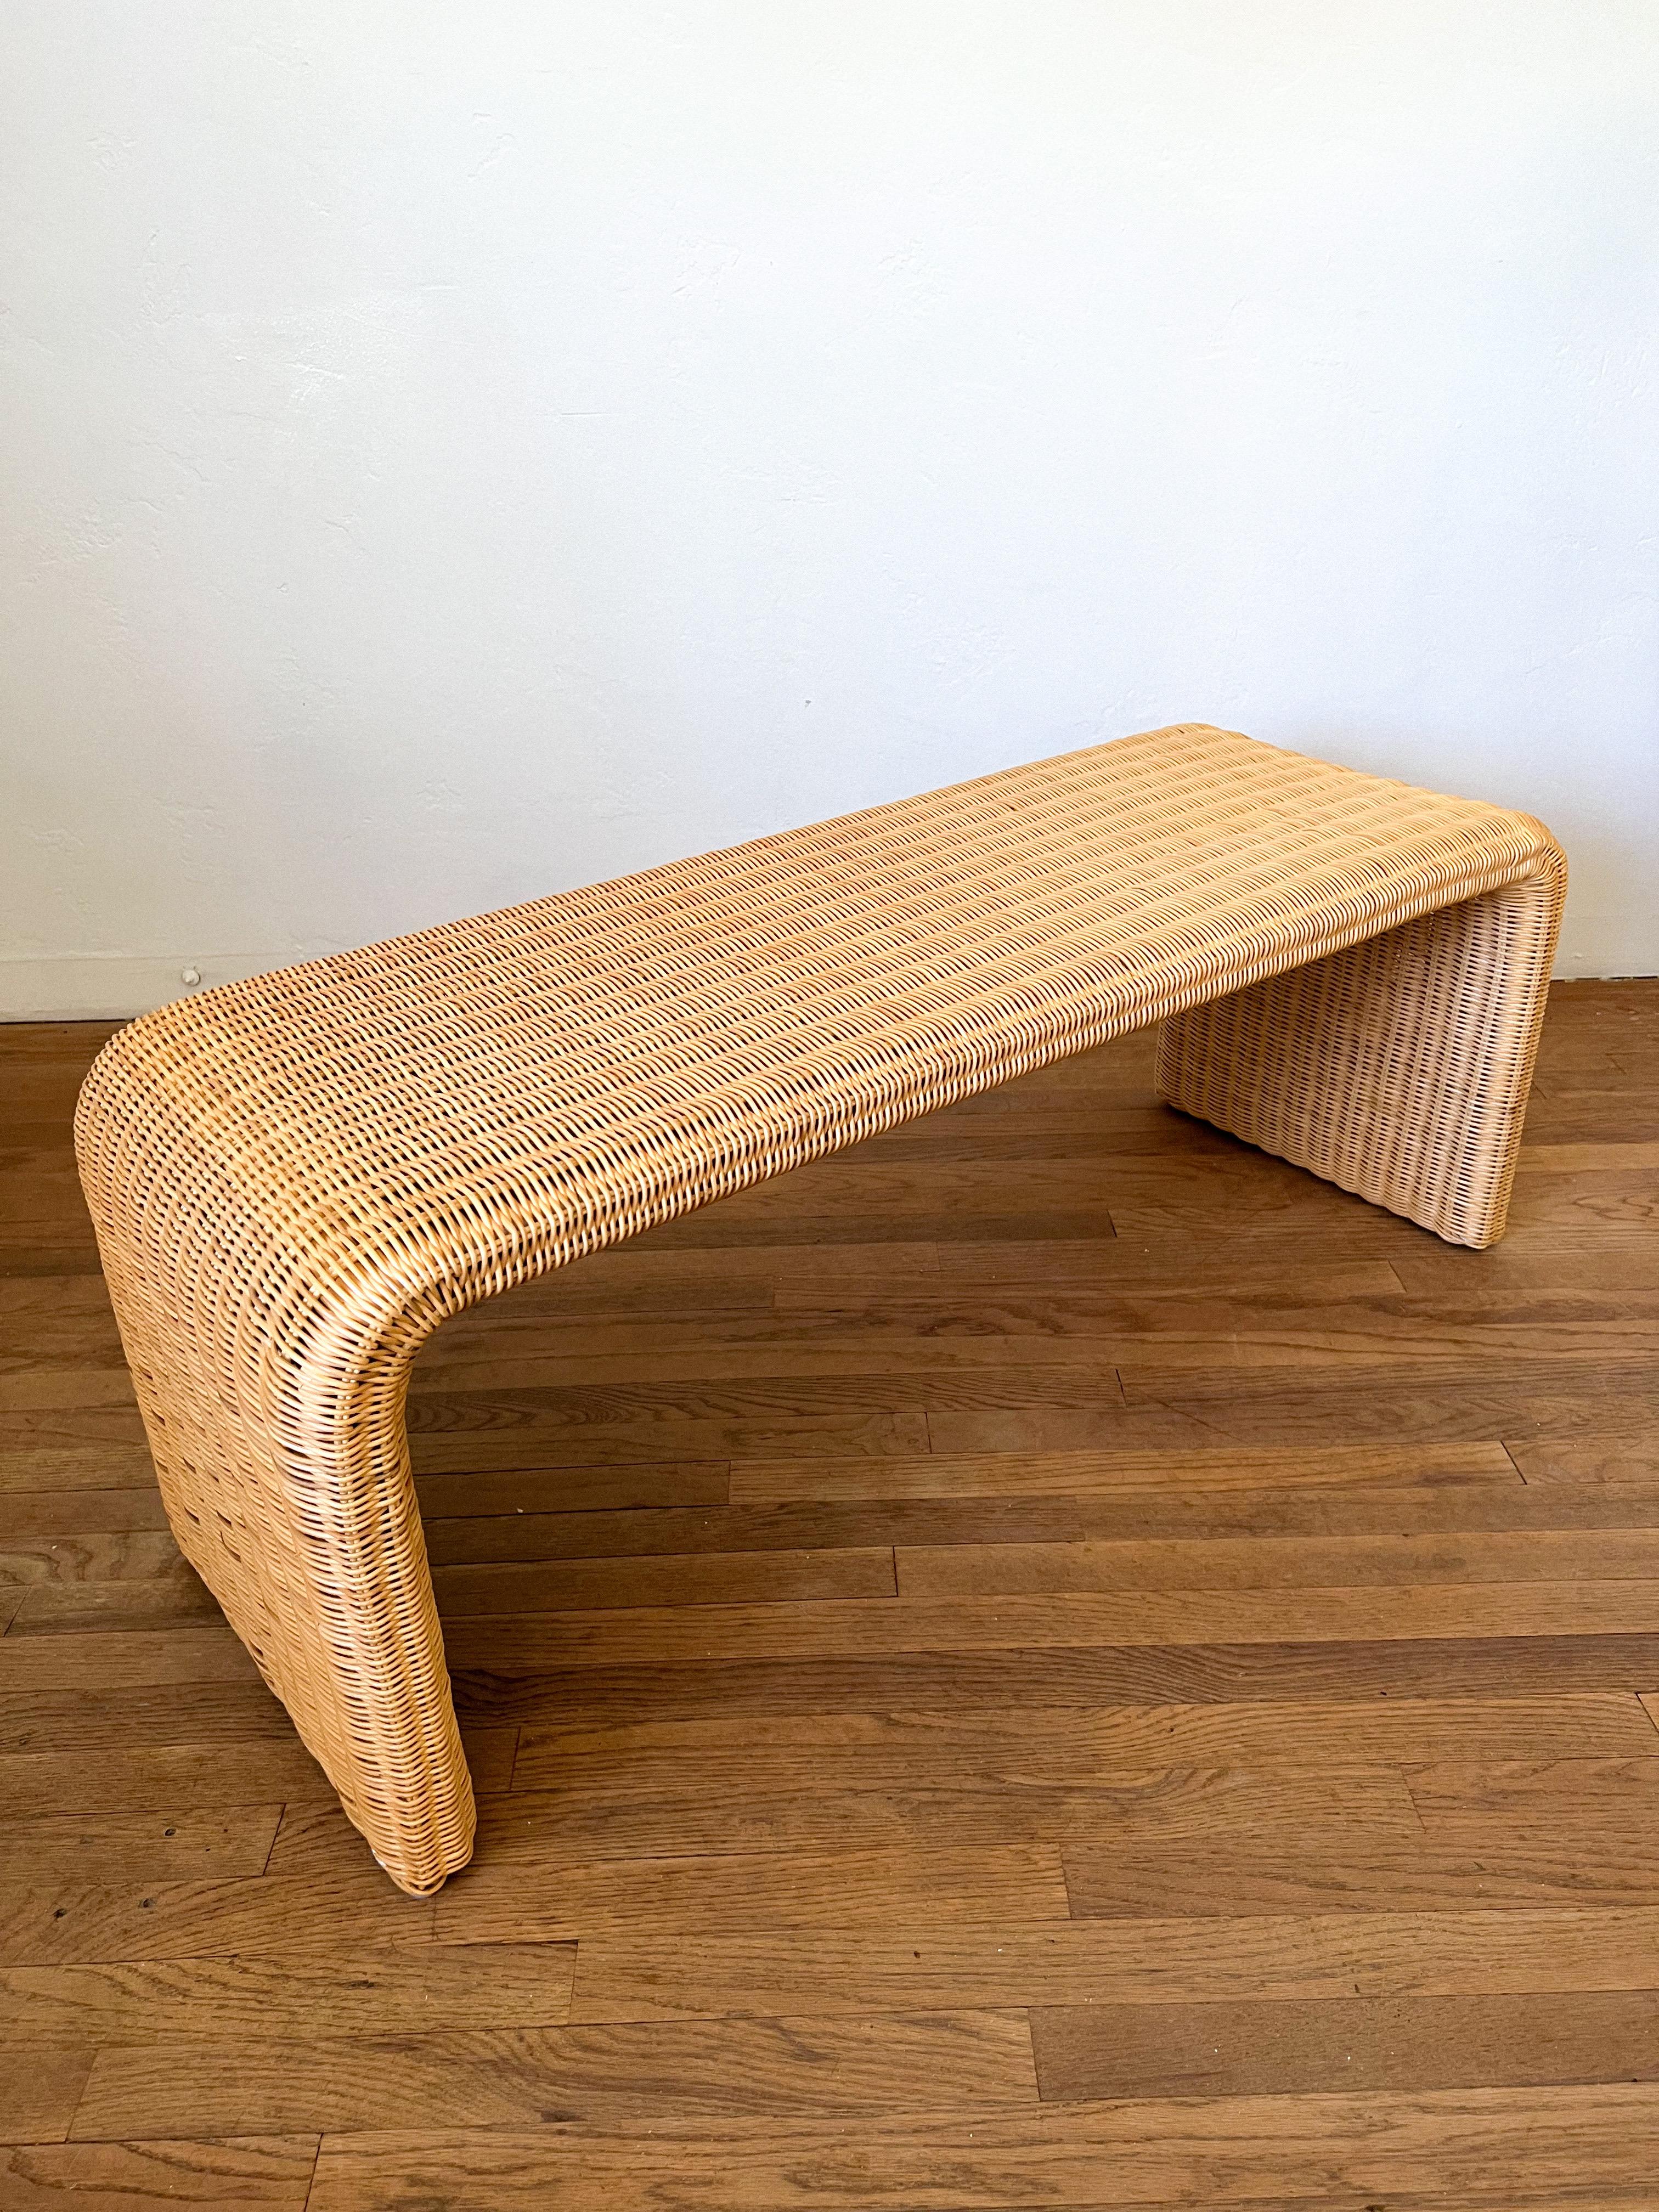 Vintage bench or ocasional table made of handwoven wicker.